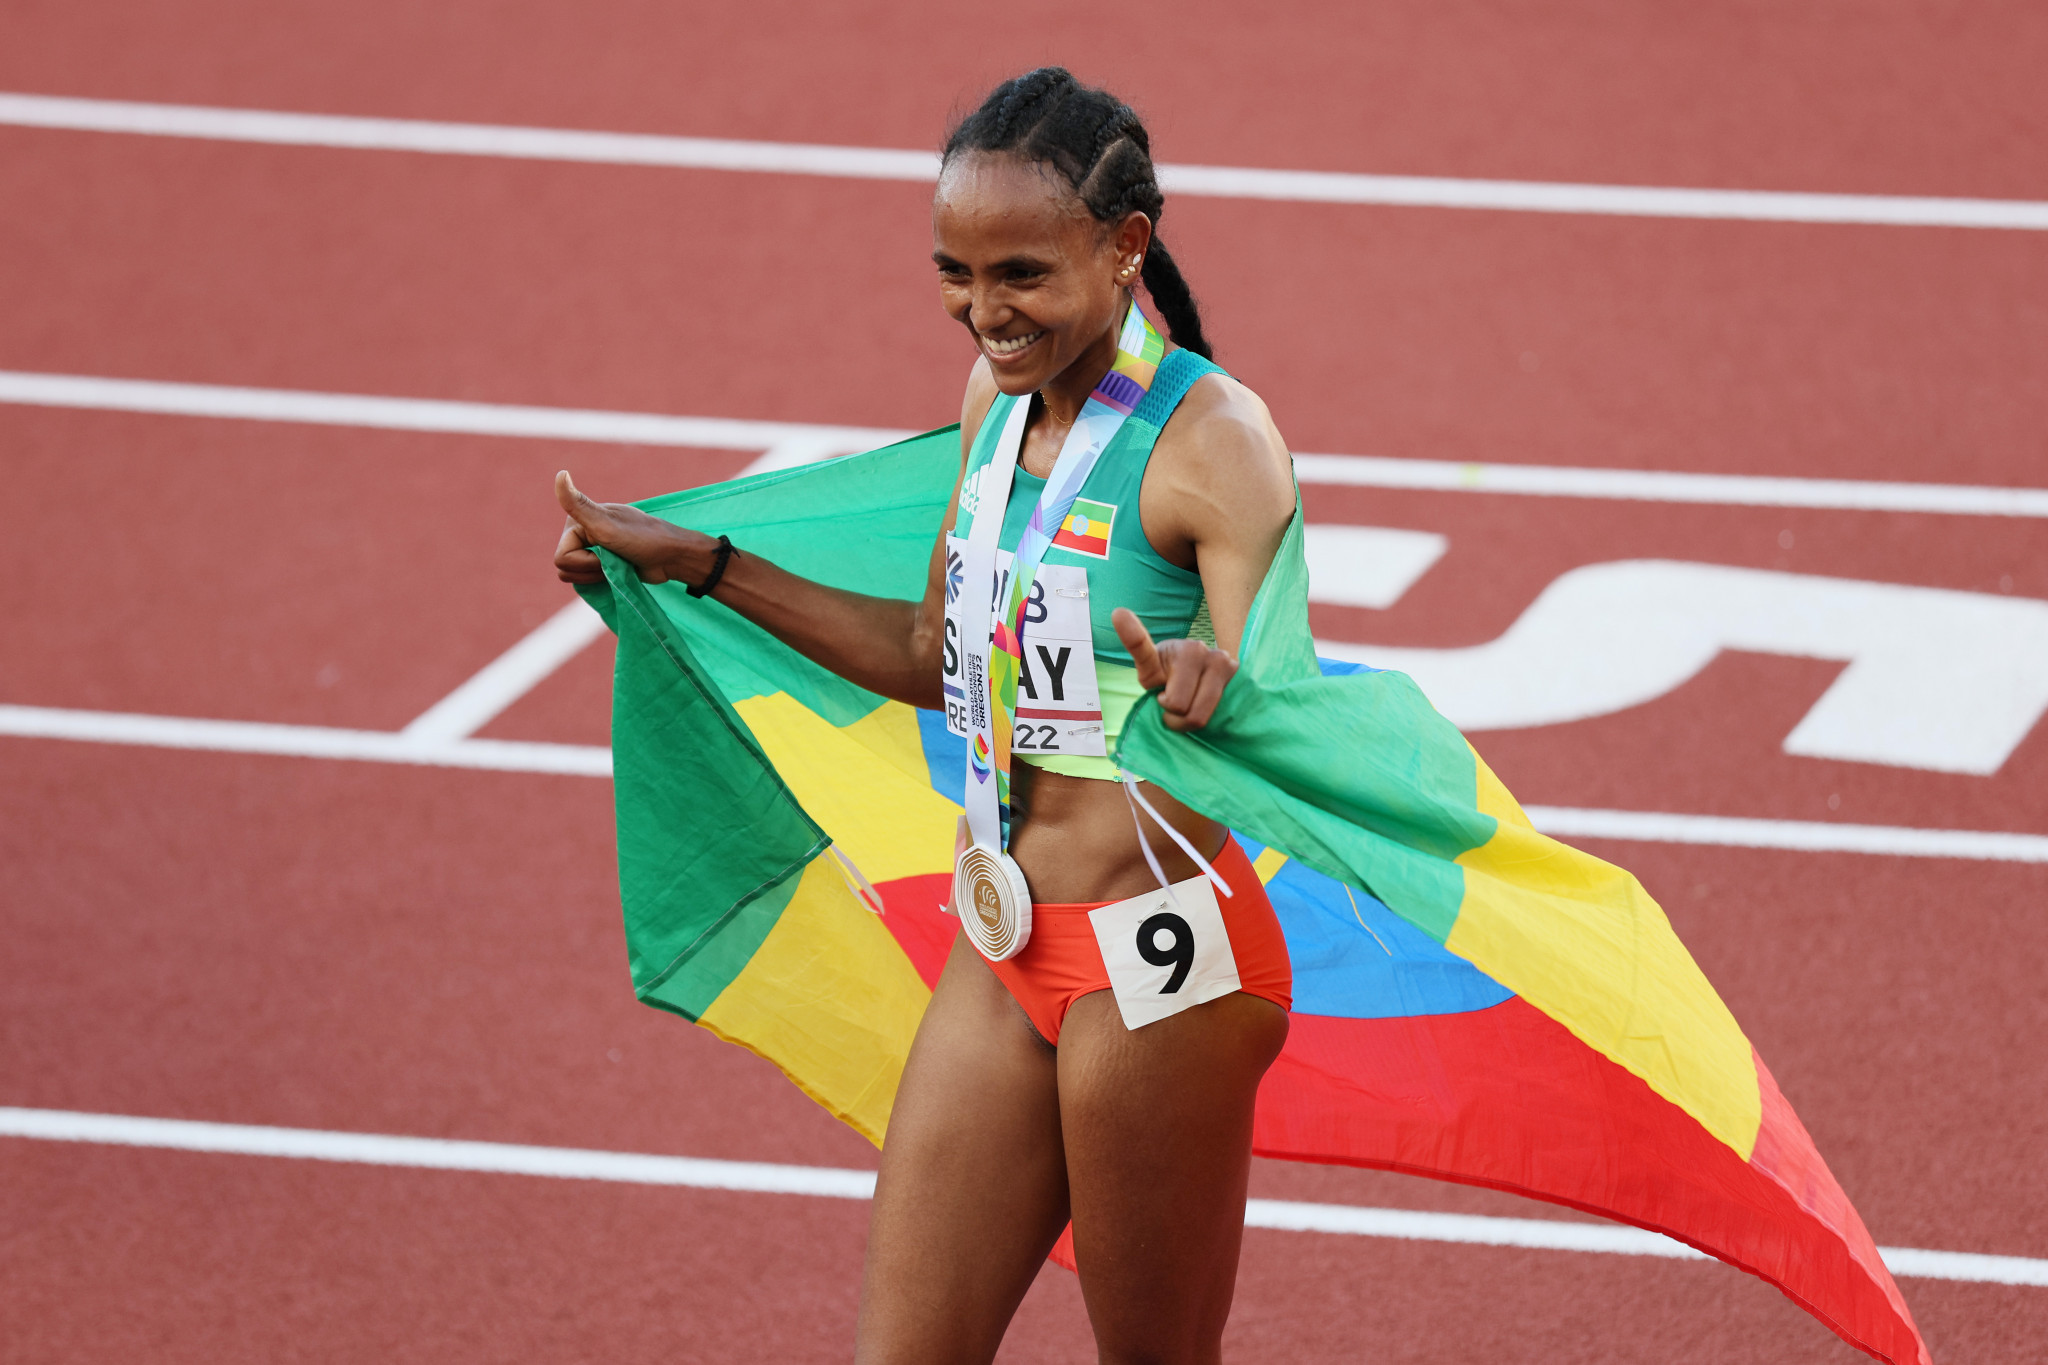 Ethiopia's Gudaf Tsegay secured the women’s 5,000m title, crossing the line in 14min 46.29sec
©Getty Images